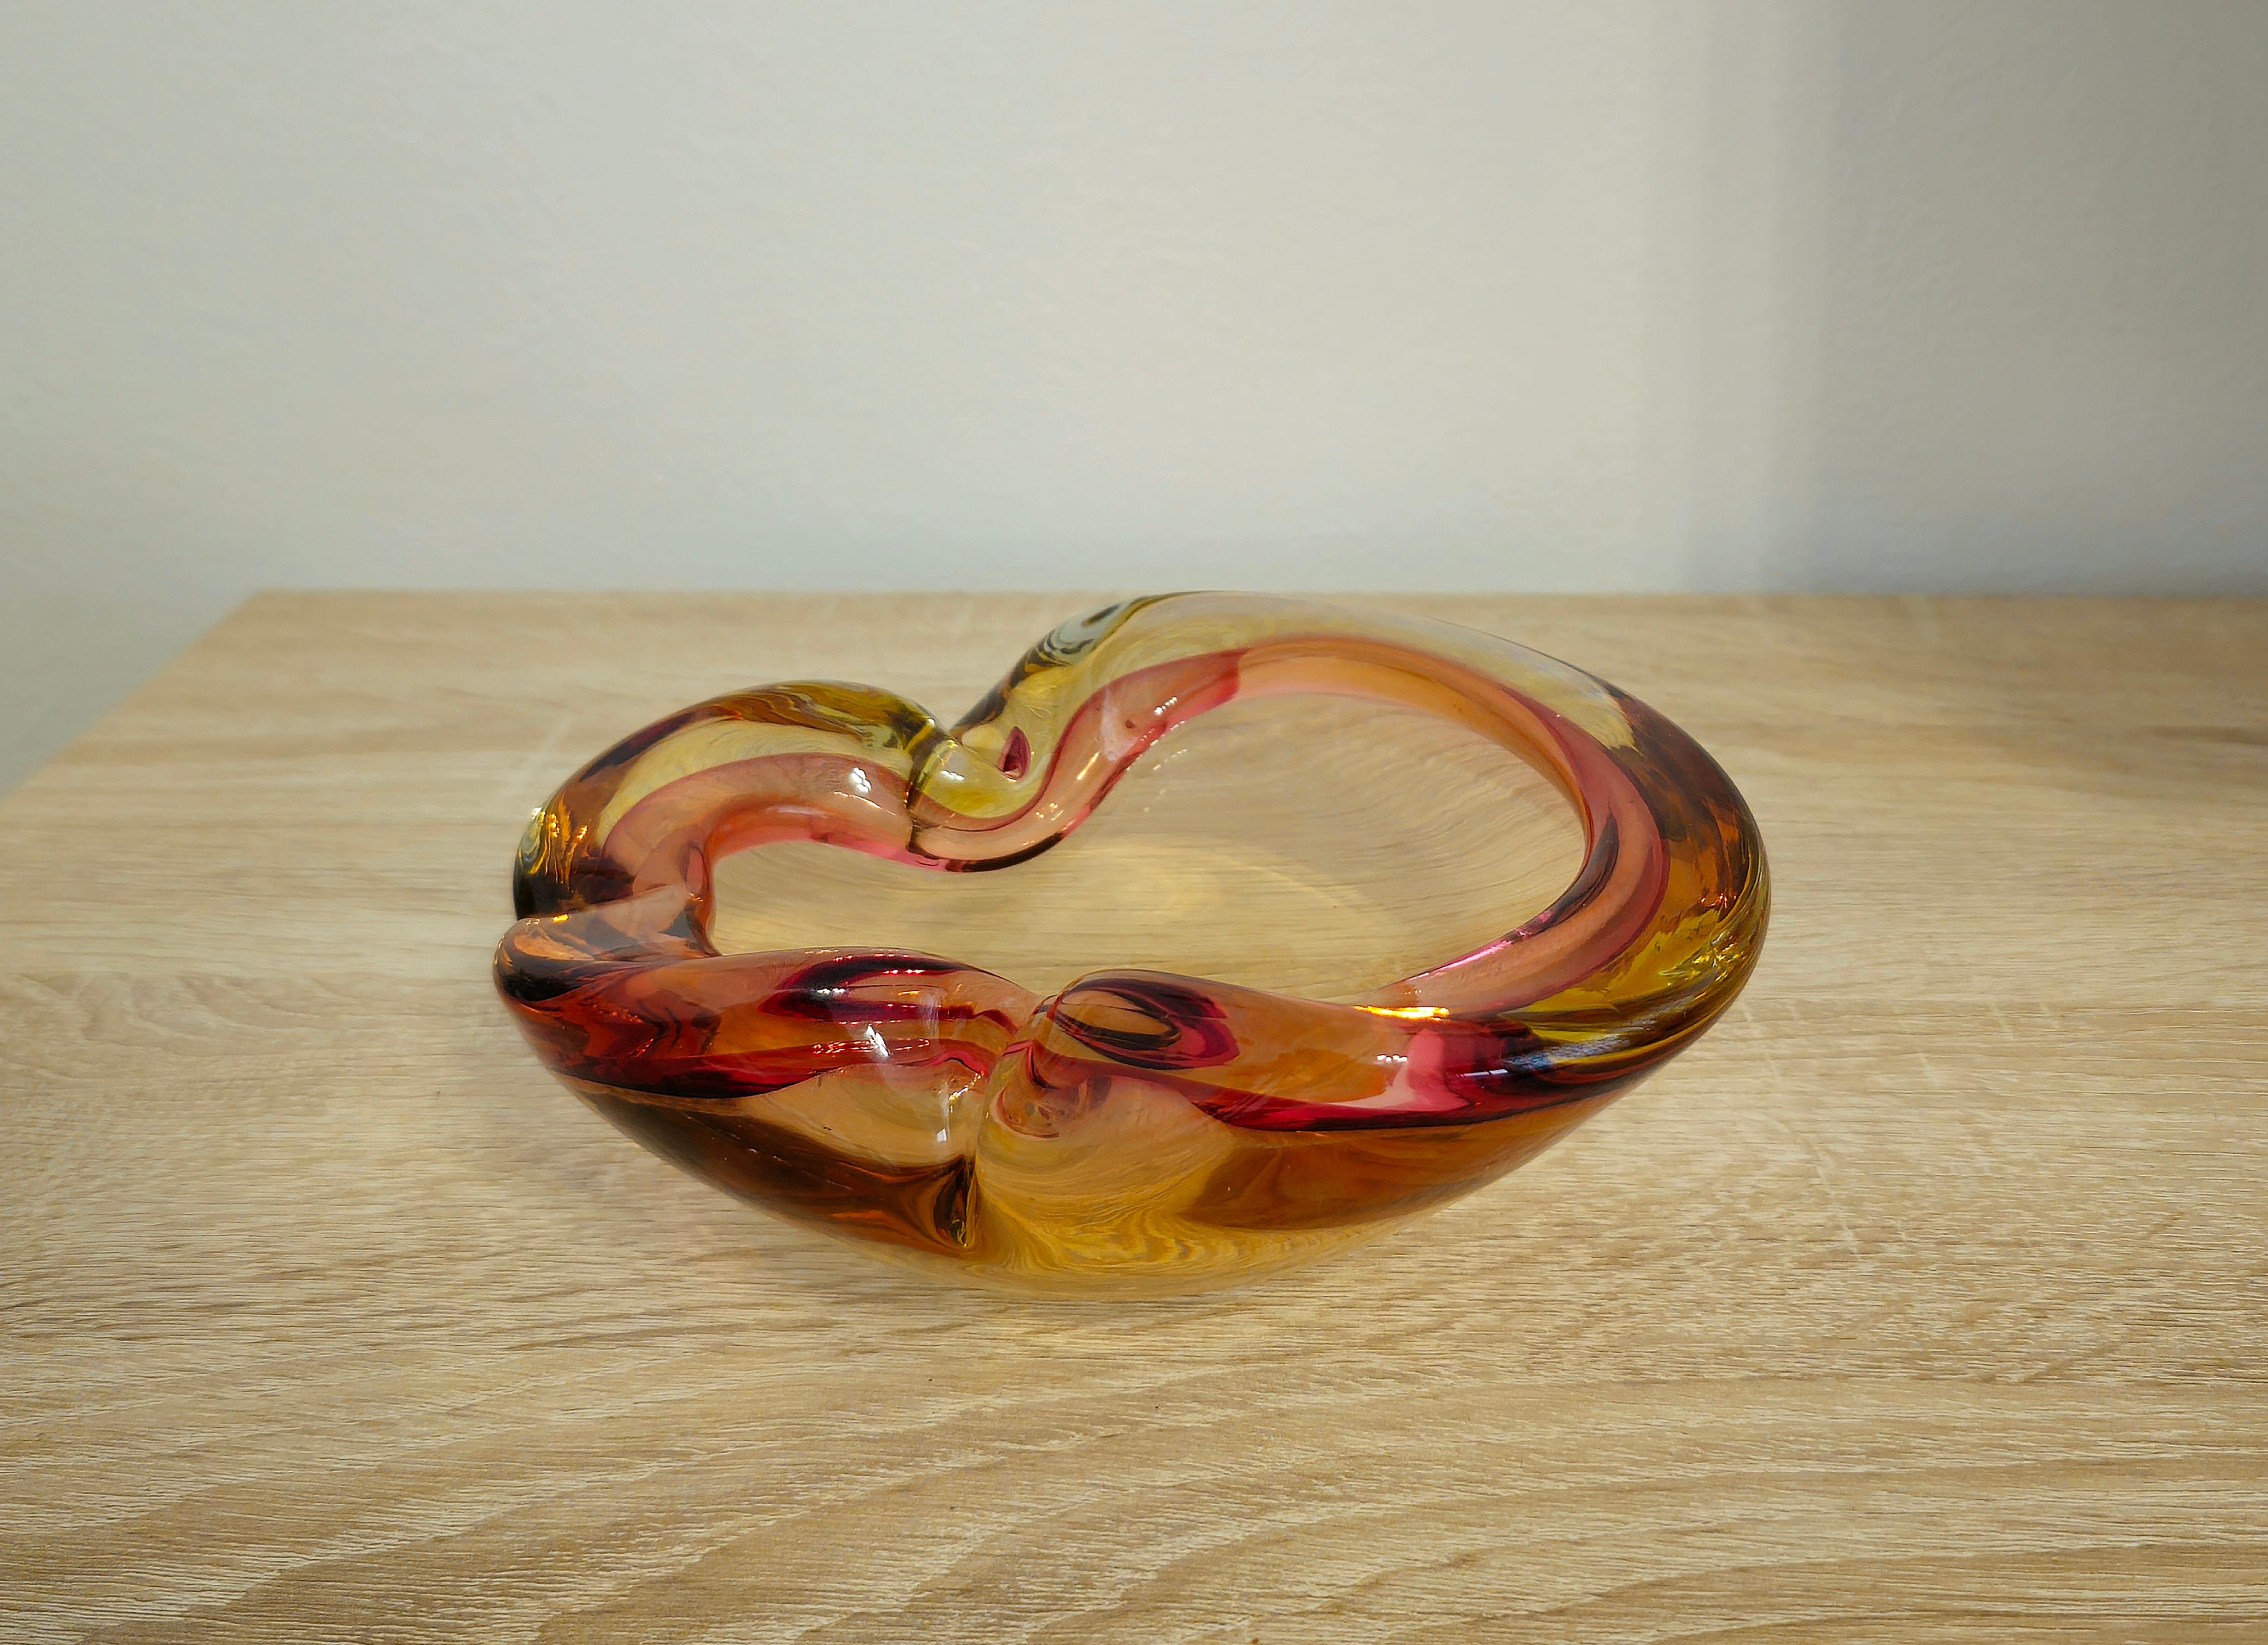 Ashtray or bowl attributed to the well-known Italian designer Archimede Seguso and produced in Italy in the 60's/70's
The ashtray was made of Murano glass in shades of amber and pink with the famous 